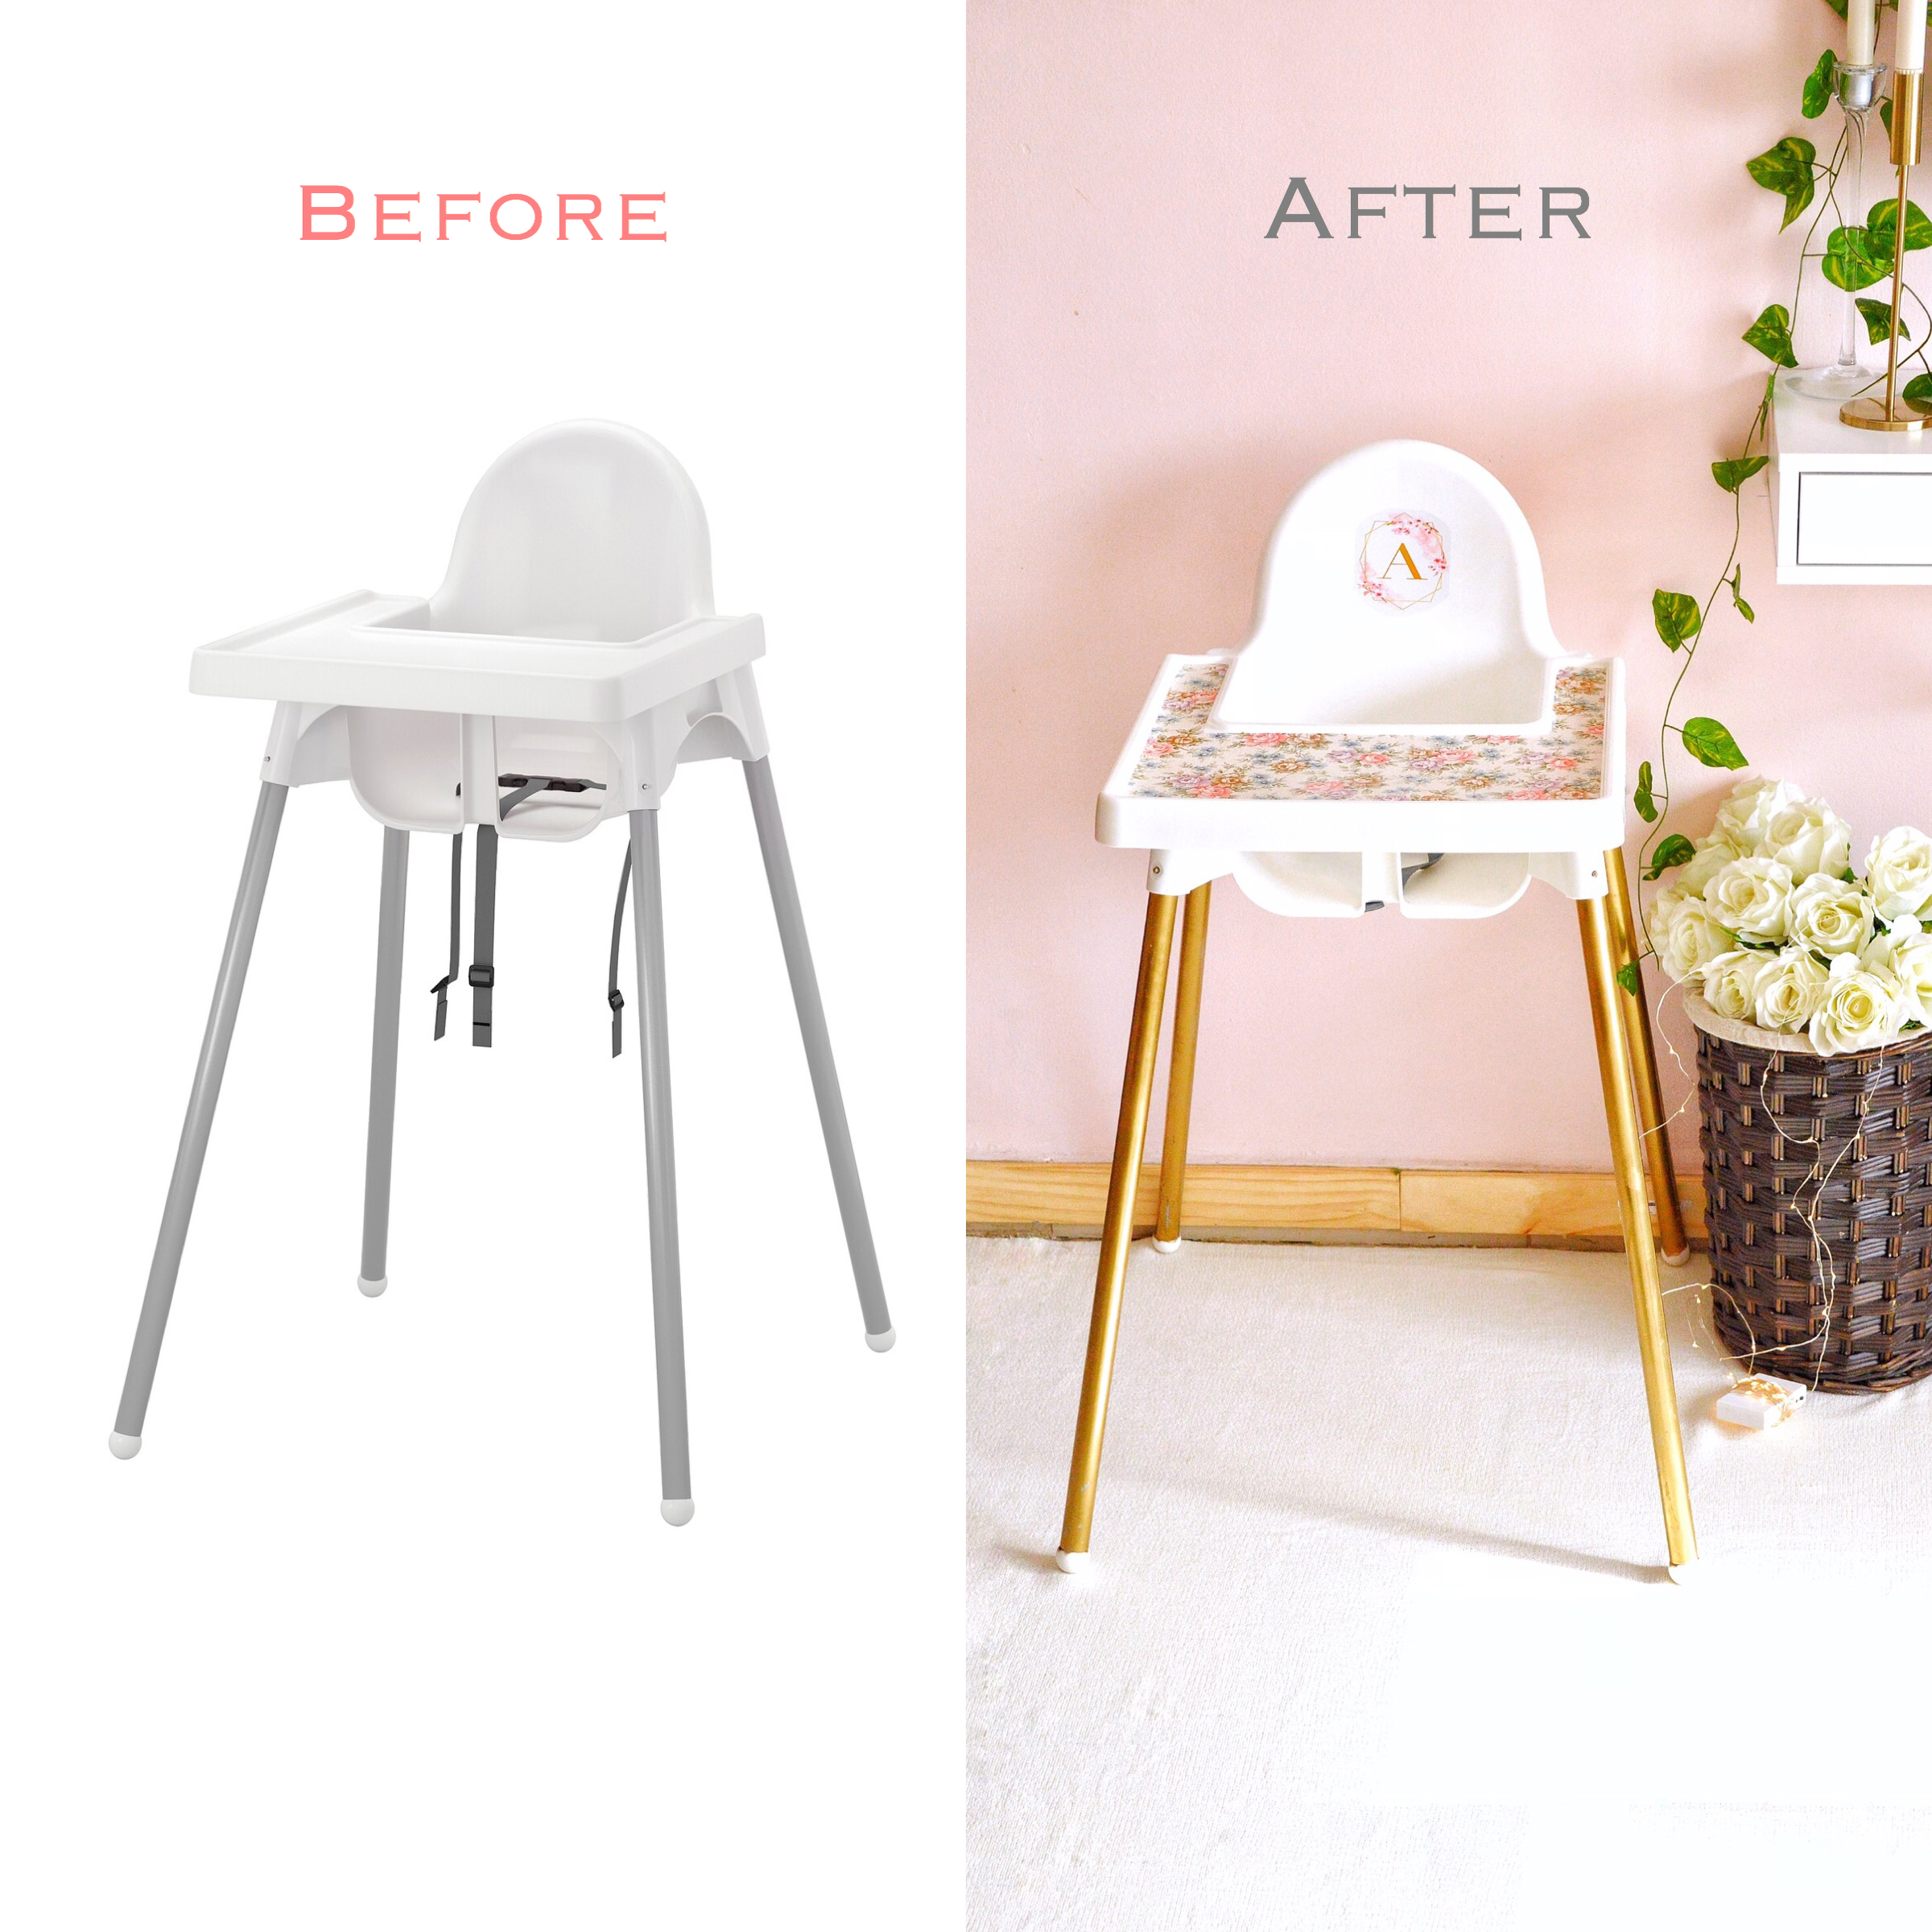 Wooden Baby High Chair Ikea Buy Clothes Shoes Online